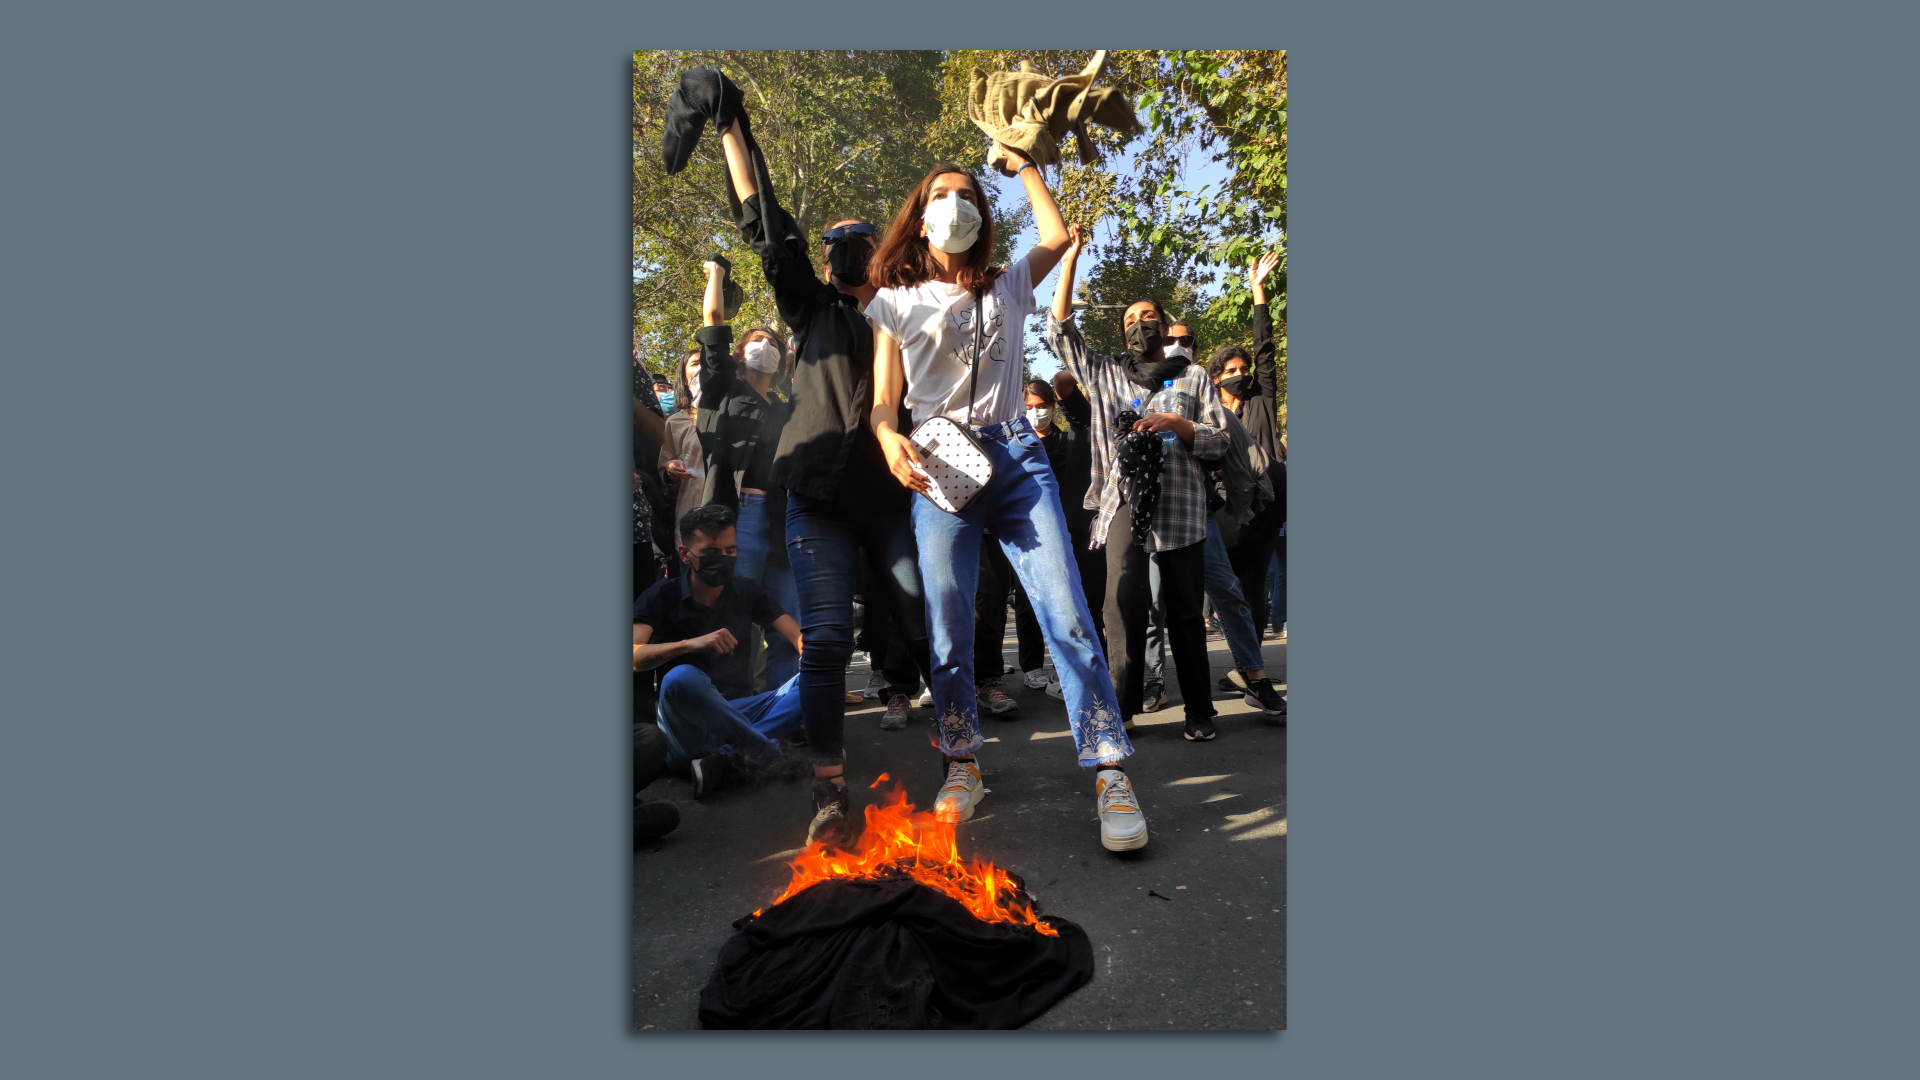 Iranian protesters set their headscarves on fire while marching down a street on October 1 in Tehran, Iran.  Photo: Getty Images